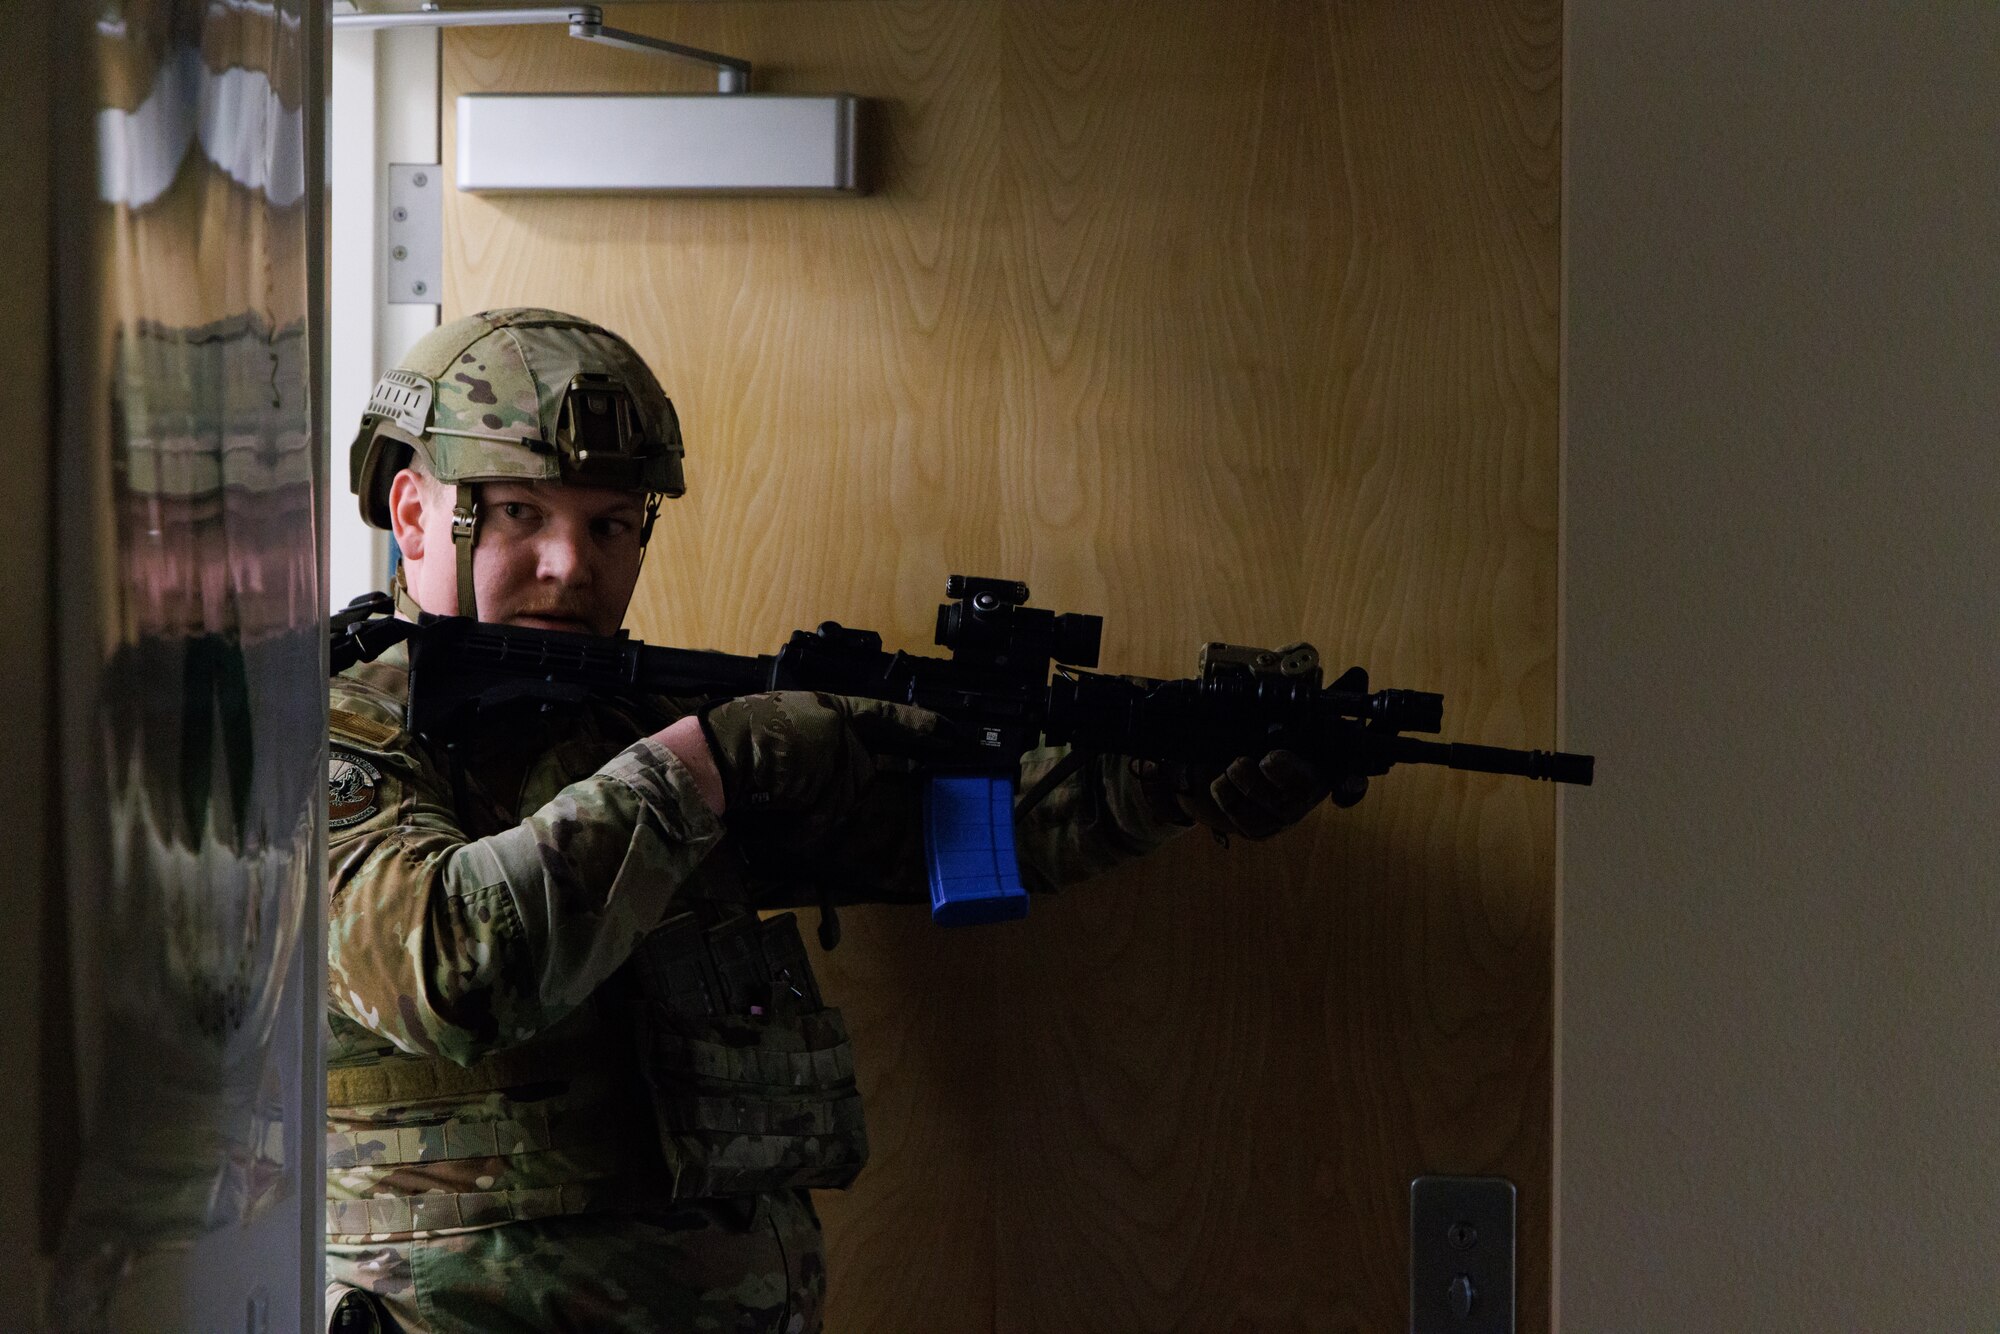 412th Security Forces Squadron member searches for a suspect during an active shooter exercise at Edwards Air Force Base, California, March 7. (Air Force photo by C.J. Raterman)